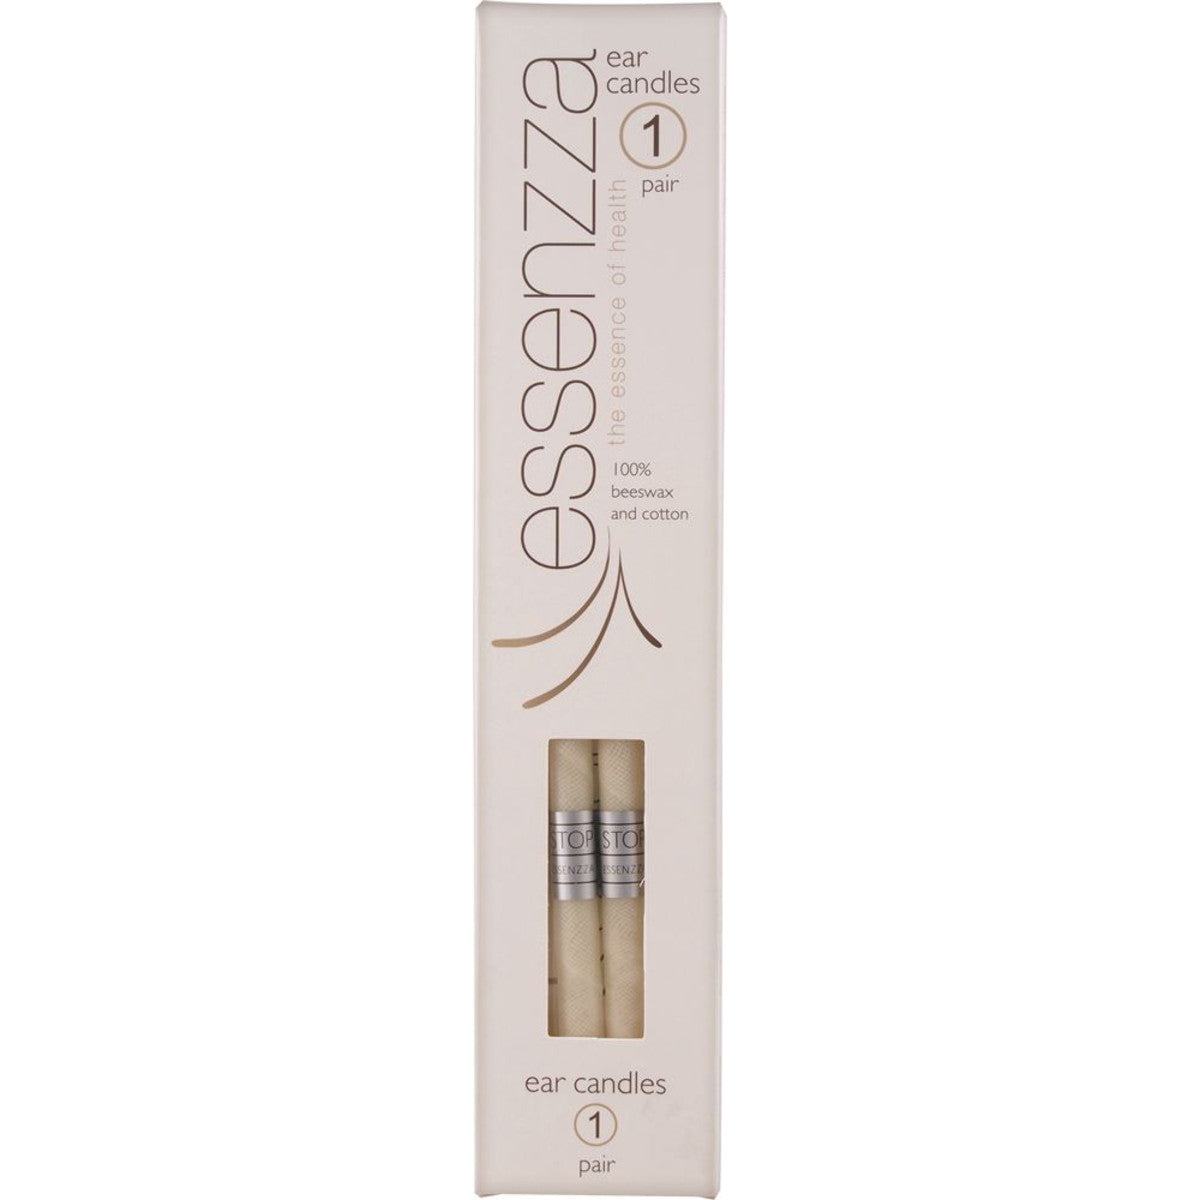 Essenzza Ear Candles